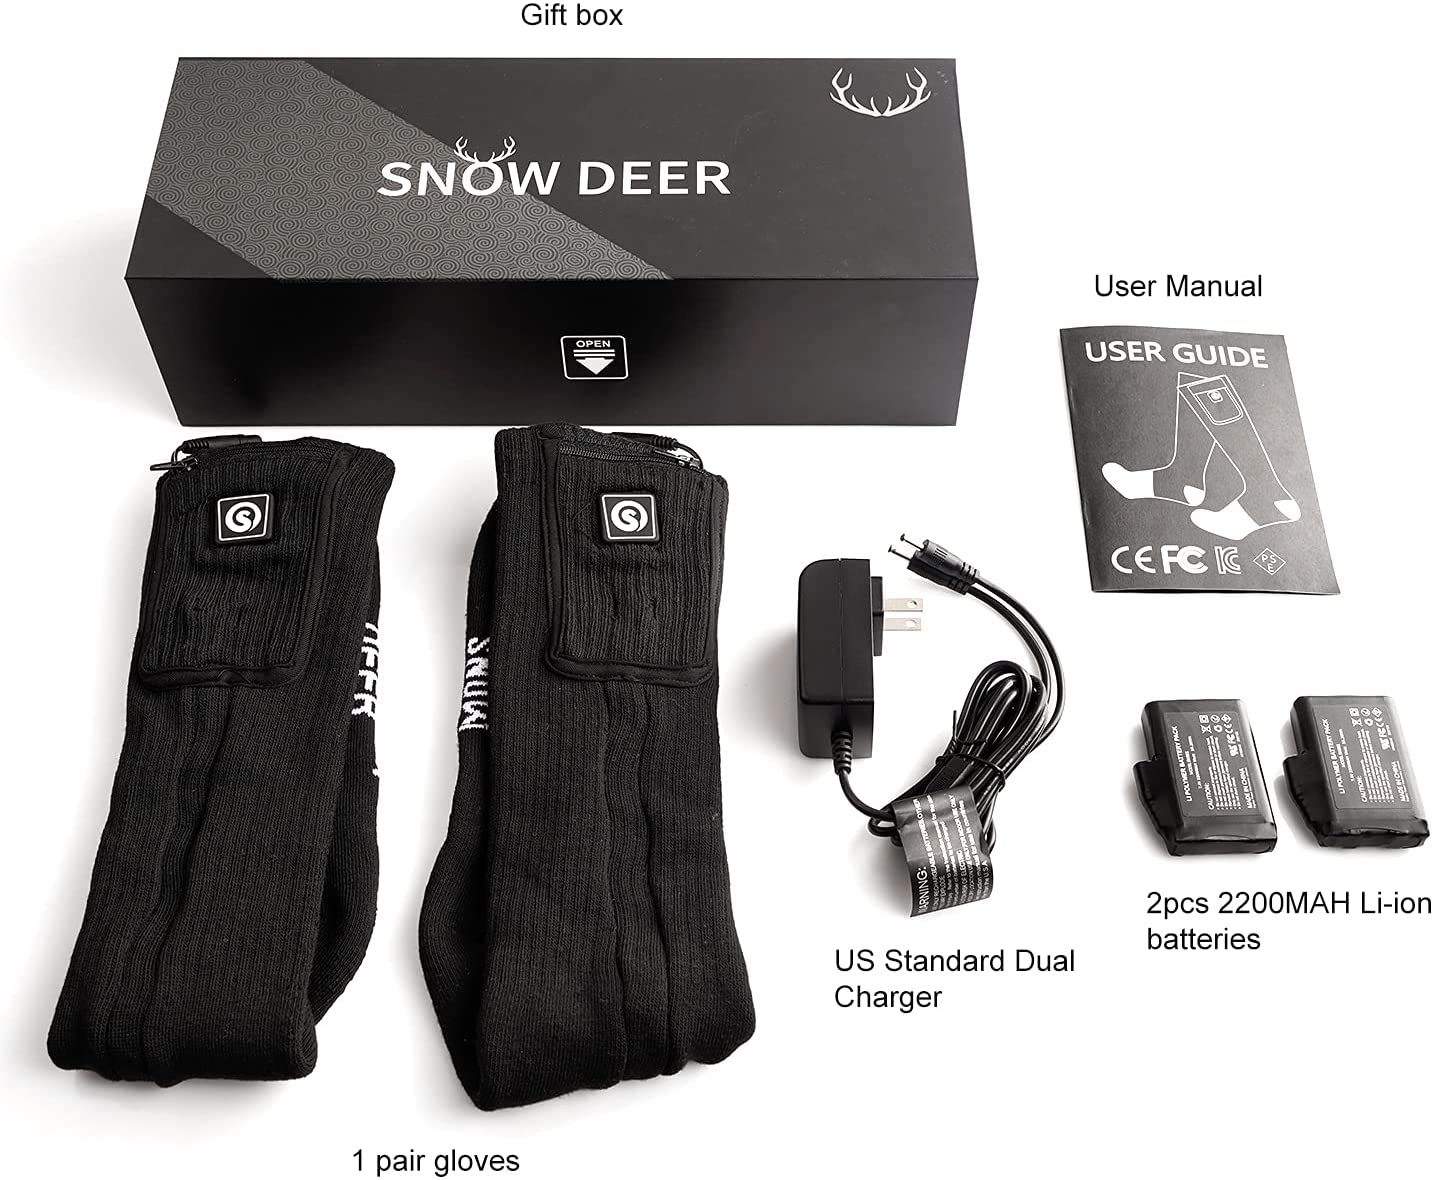  SNOW DEER 7.4V 2200MAH Rechargeable Li-ion Batteries for Heated  Gloves Heated Socks Heated Hats (2pcs Battary only,not Include Charger) :  Electronics